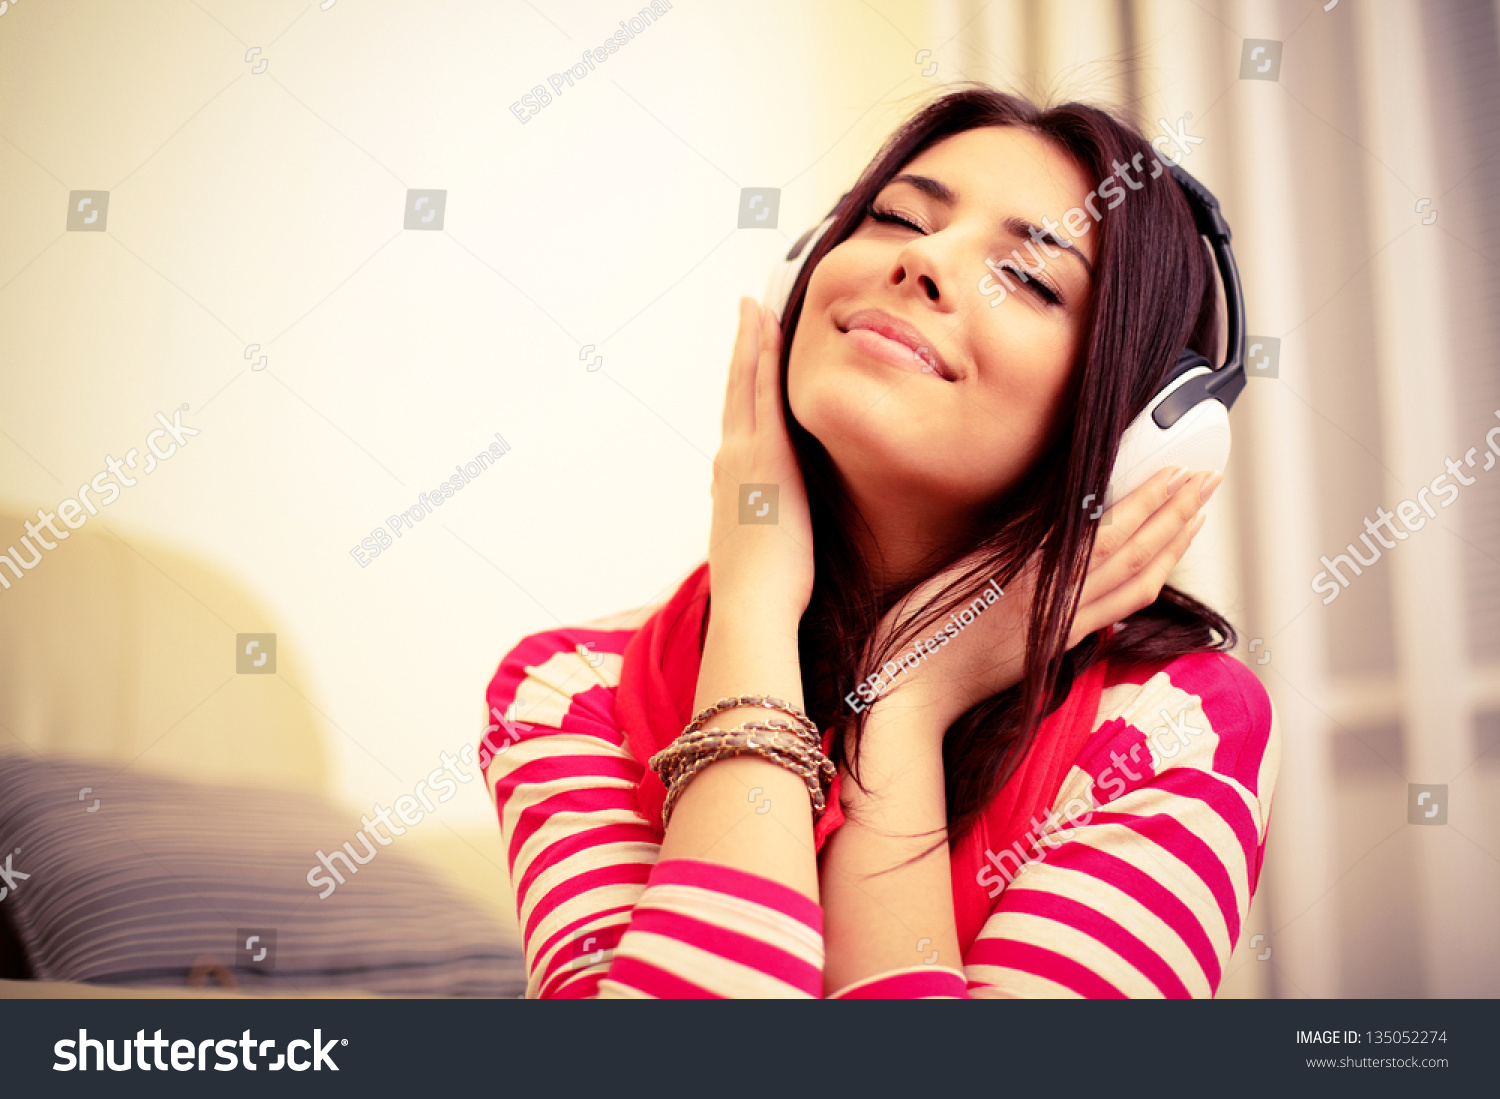 Young beautiful woman in bright outfit enjoying the music at home #135052274